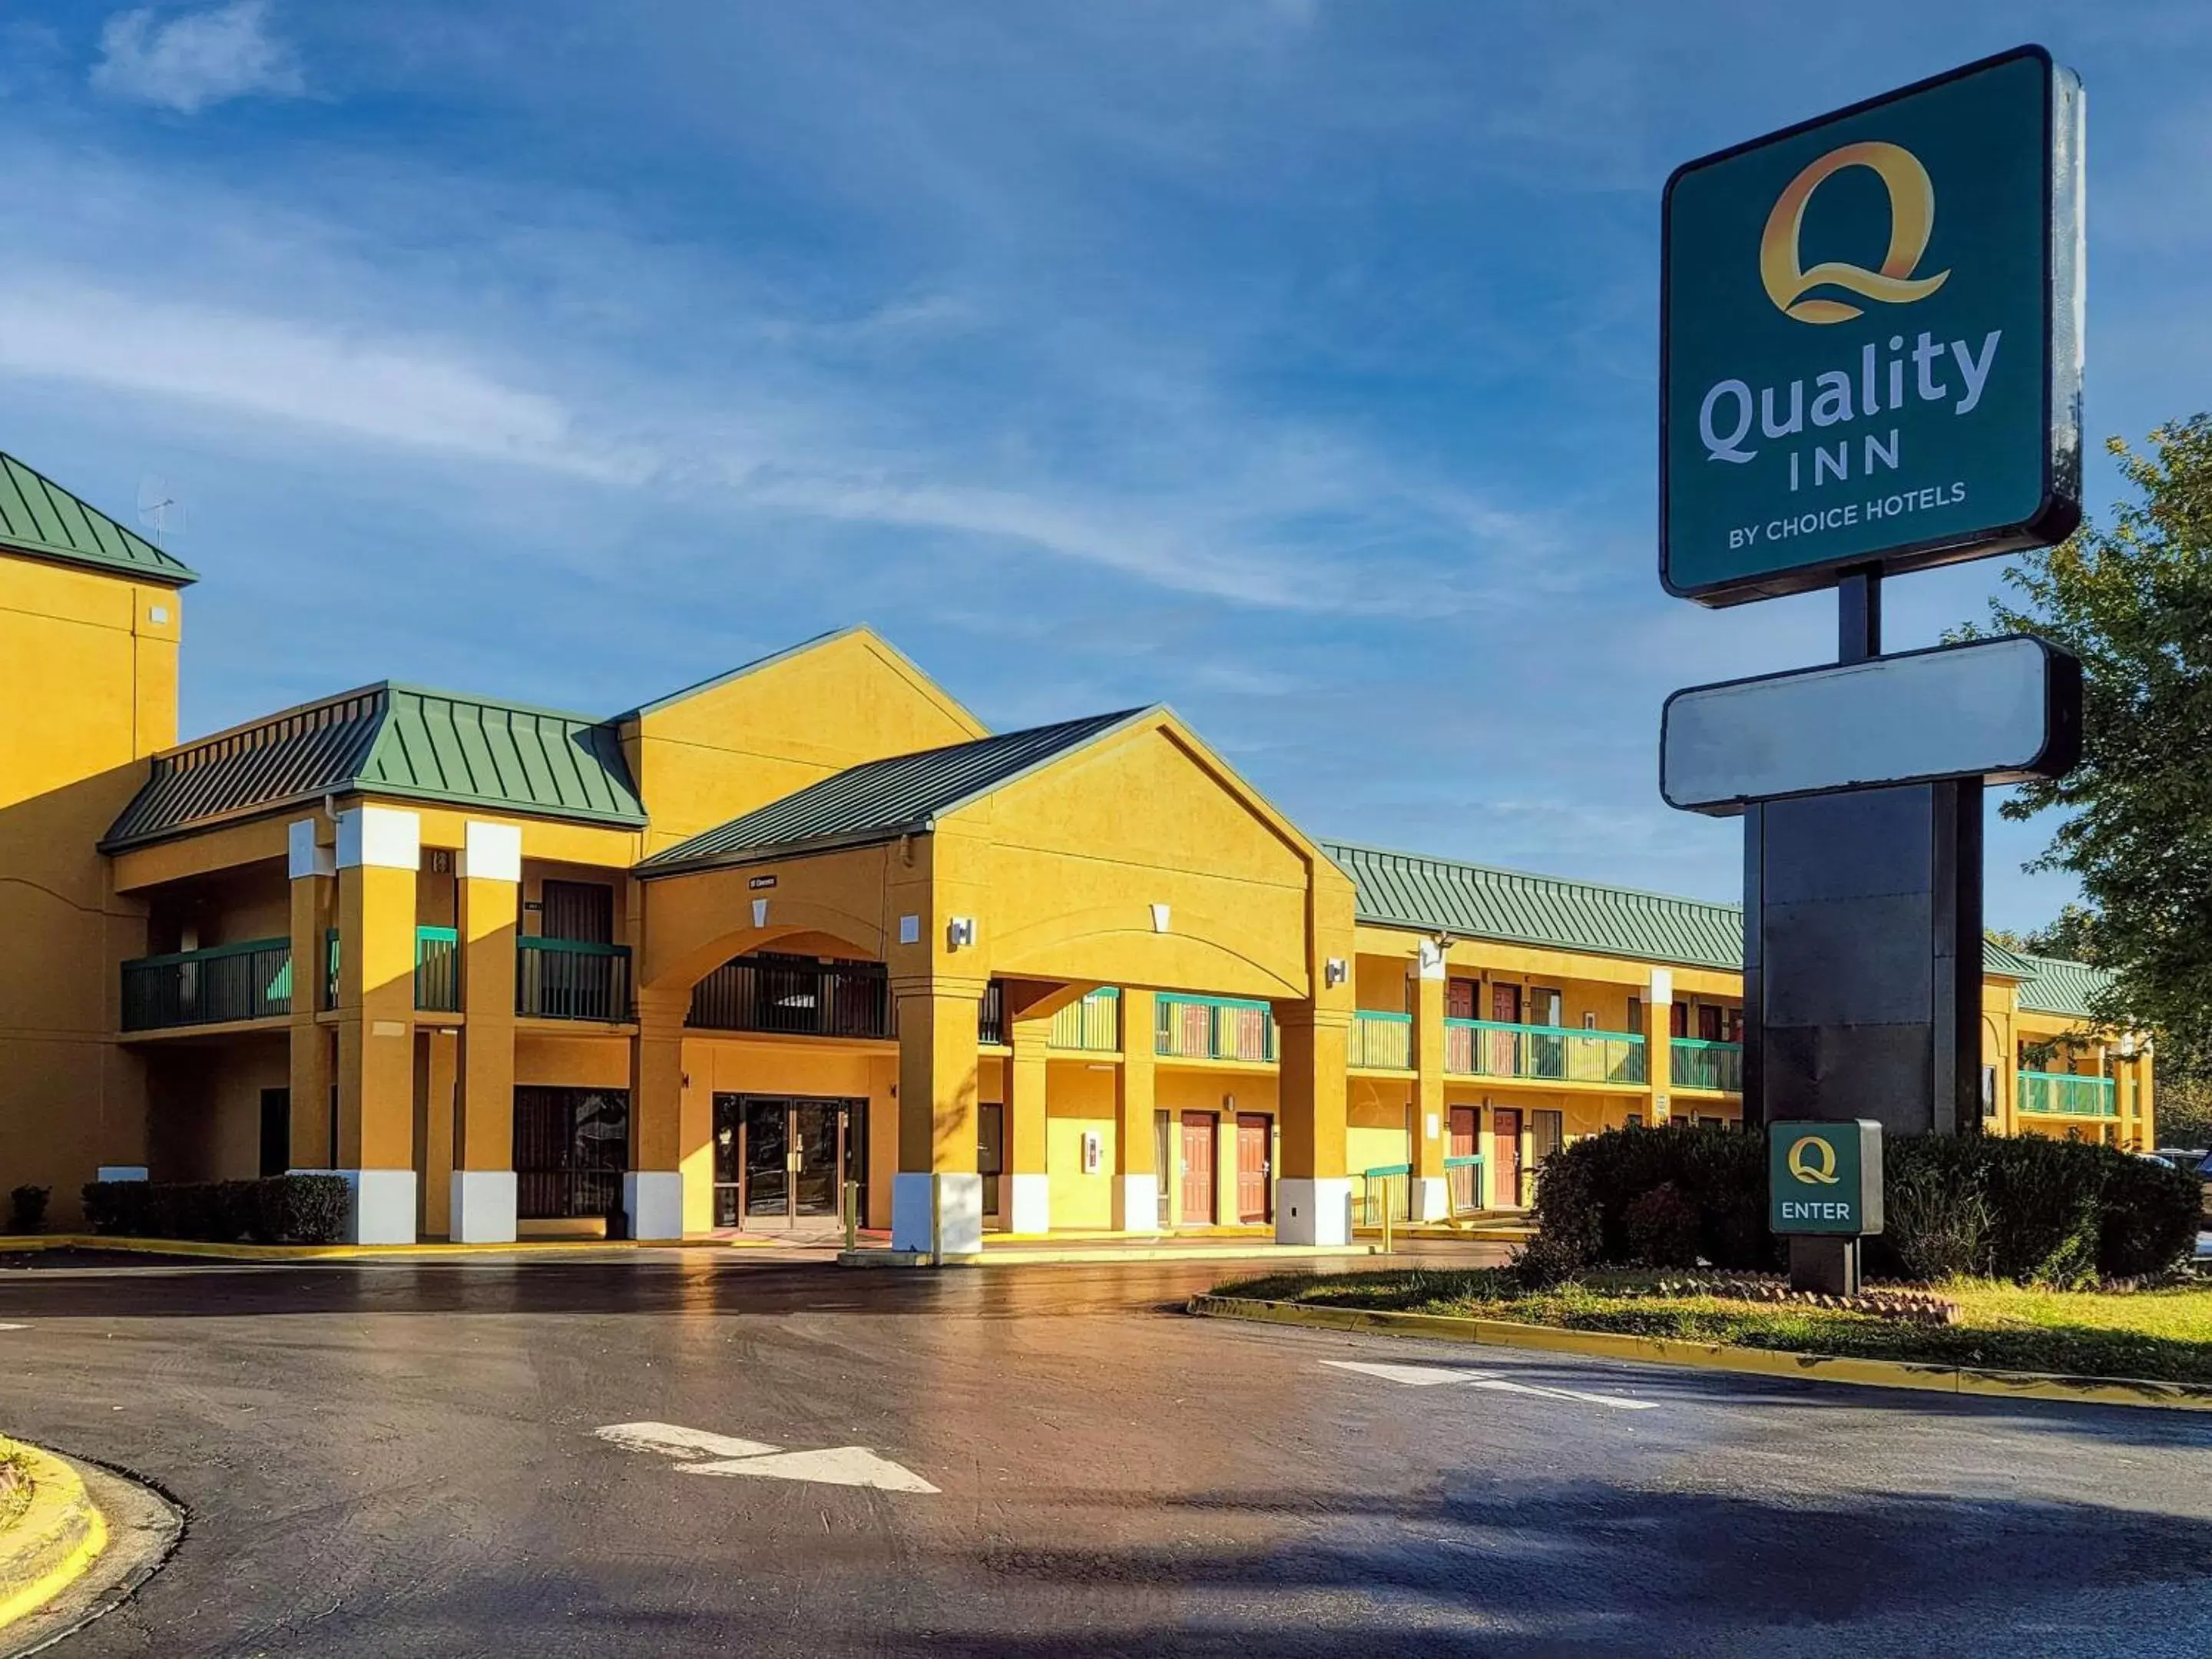 Property Building in Quality Inn Fort Campbell